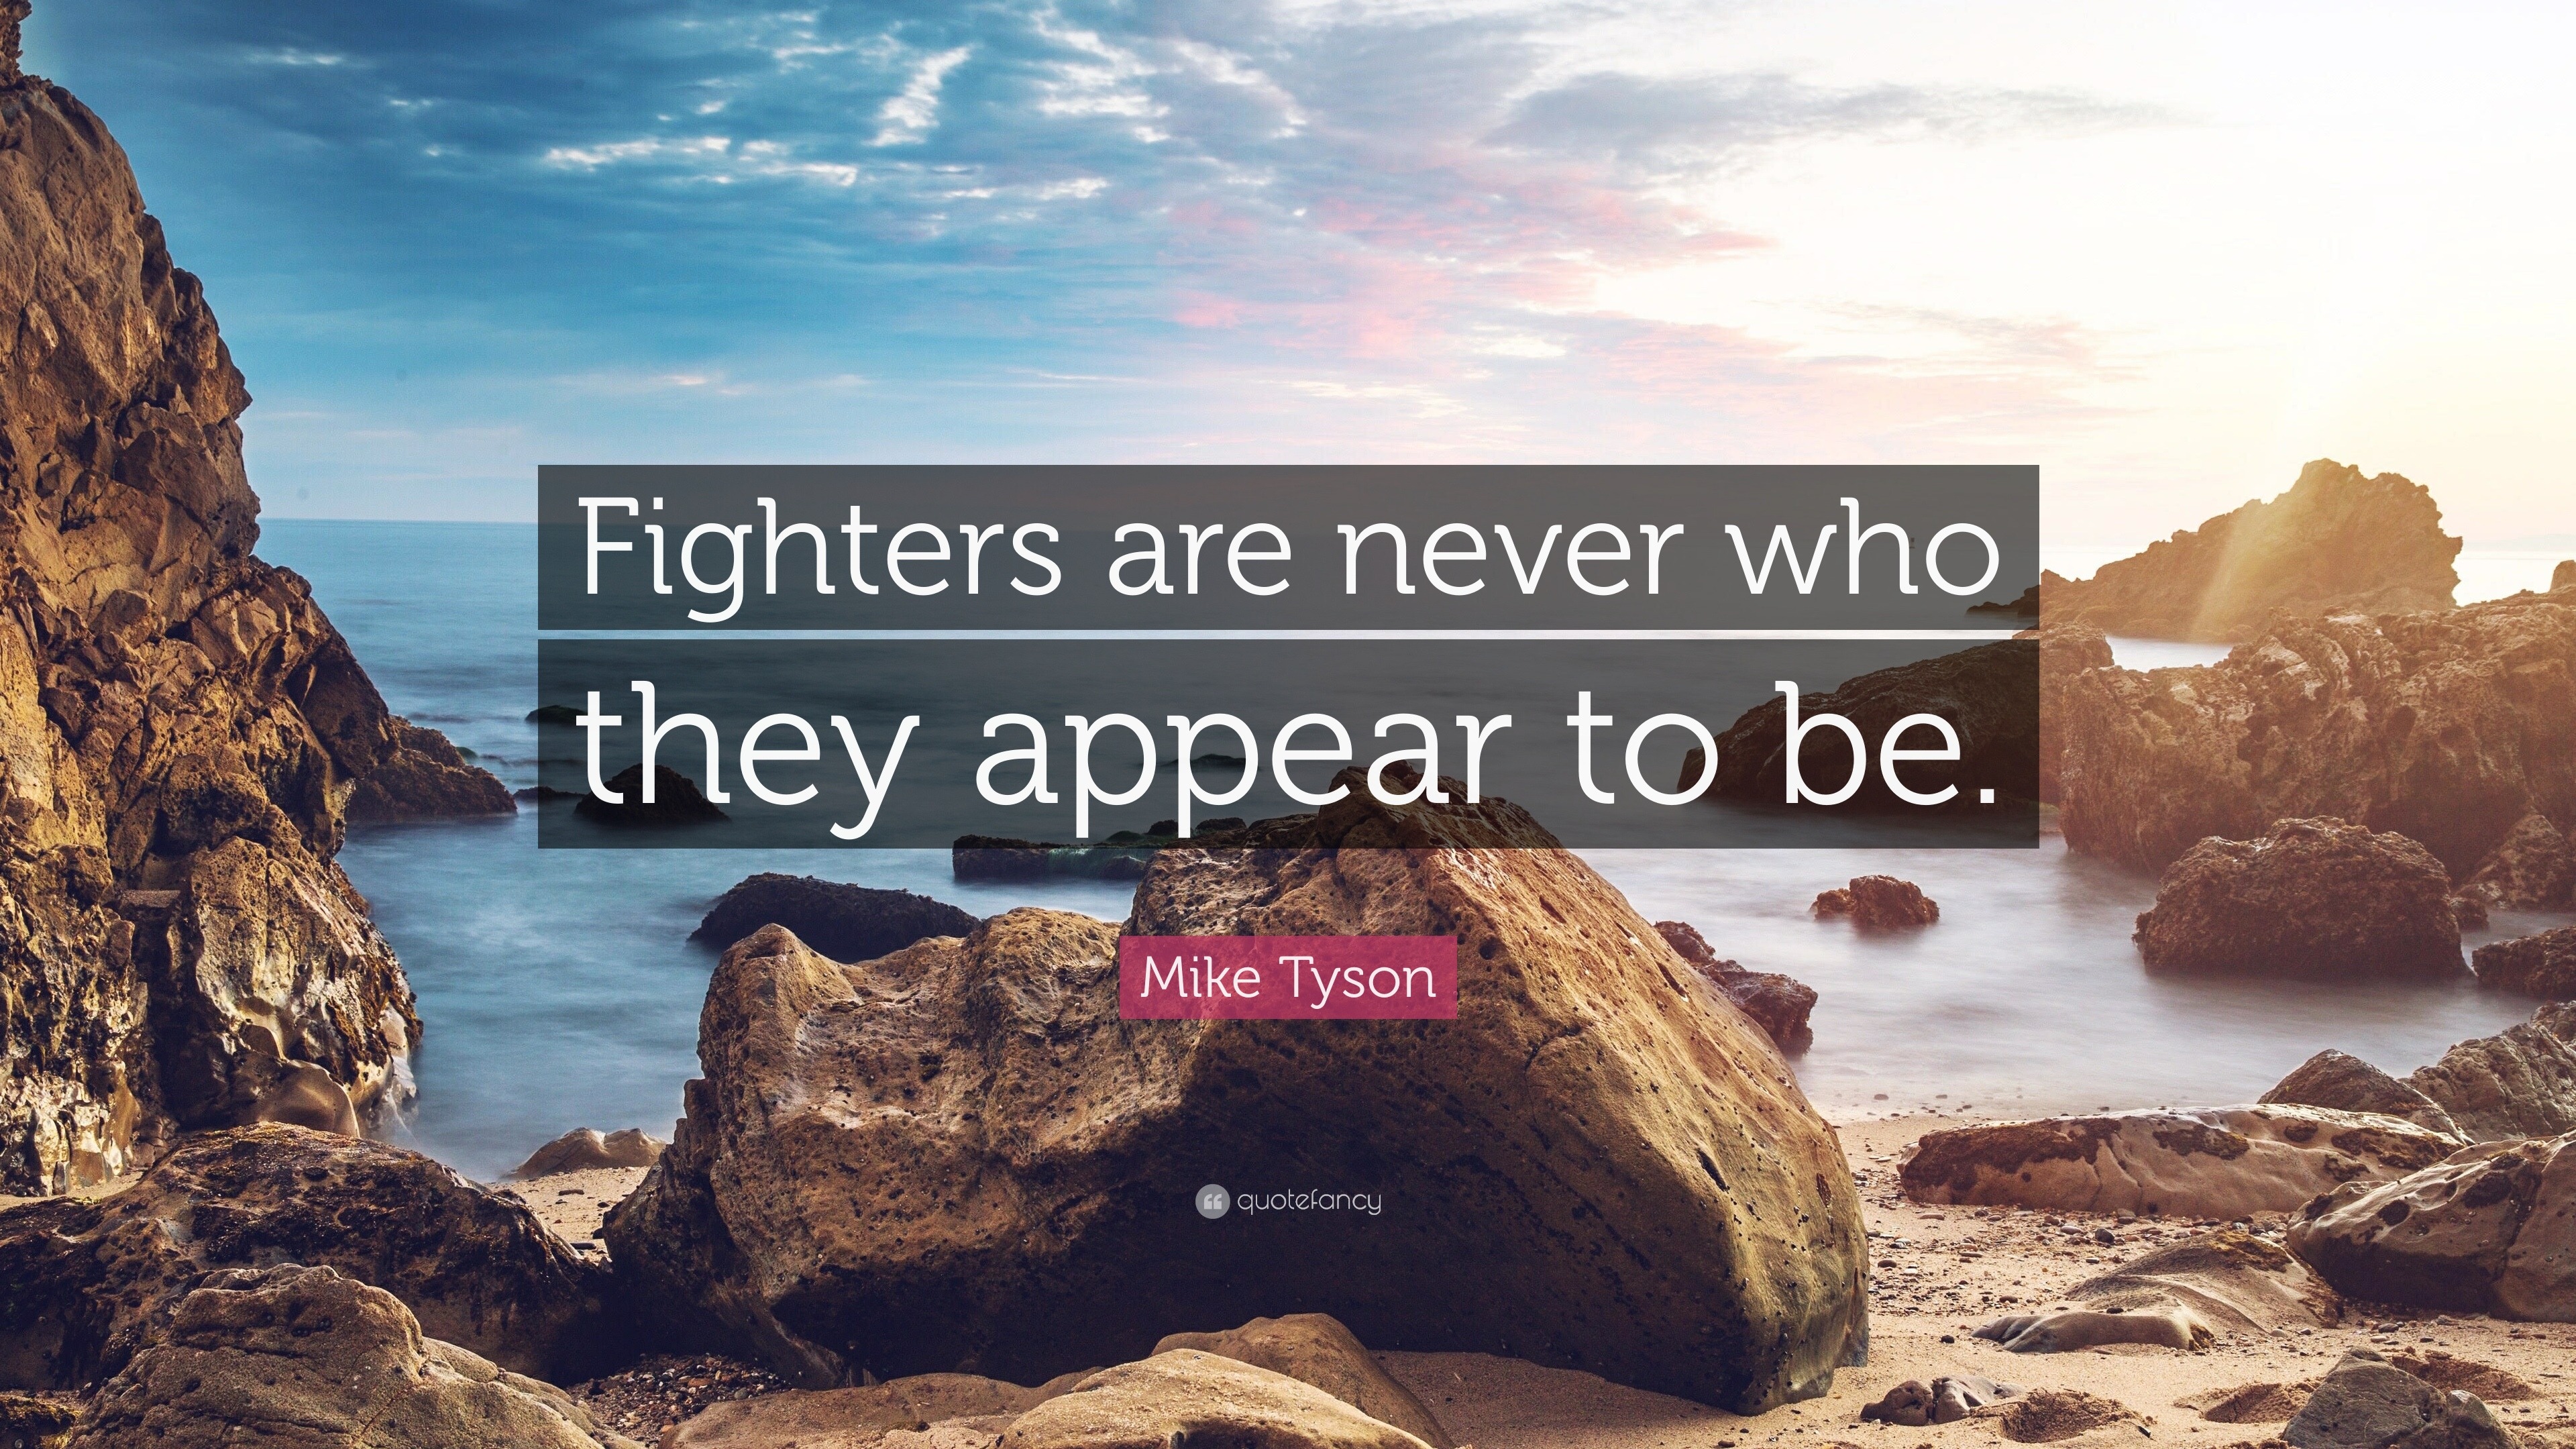 Mike Tyson Quote: “Fighters are never who they appear to be.”